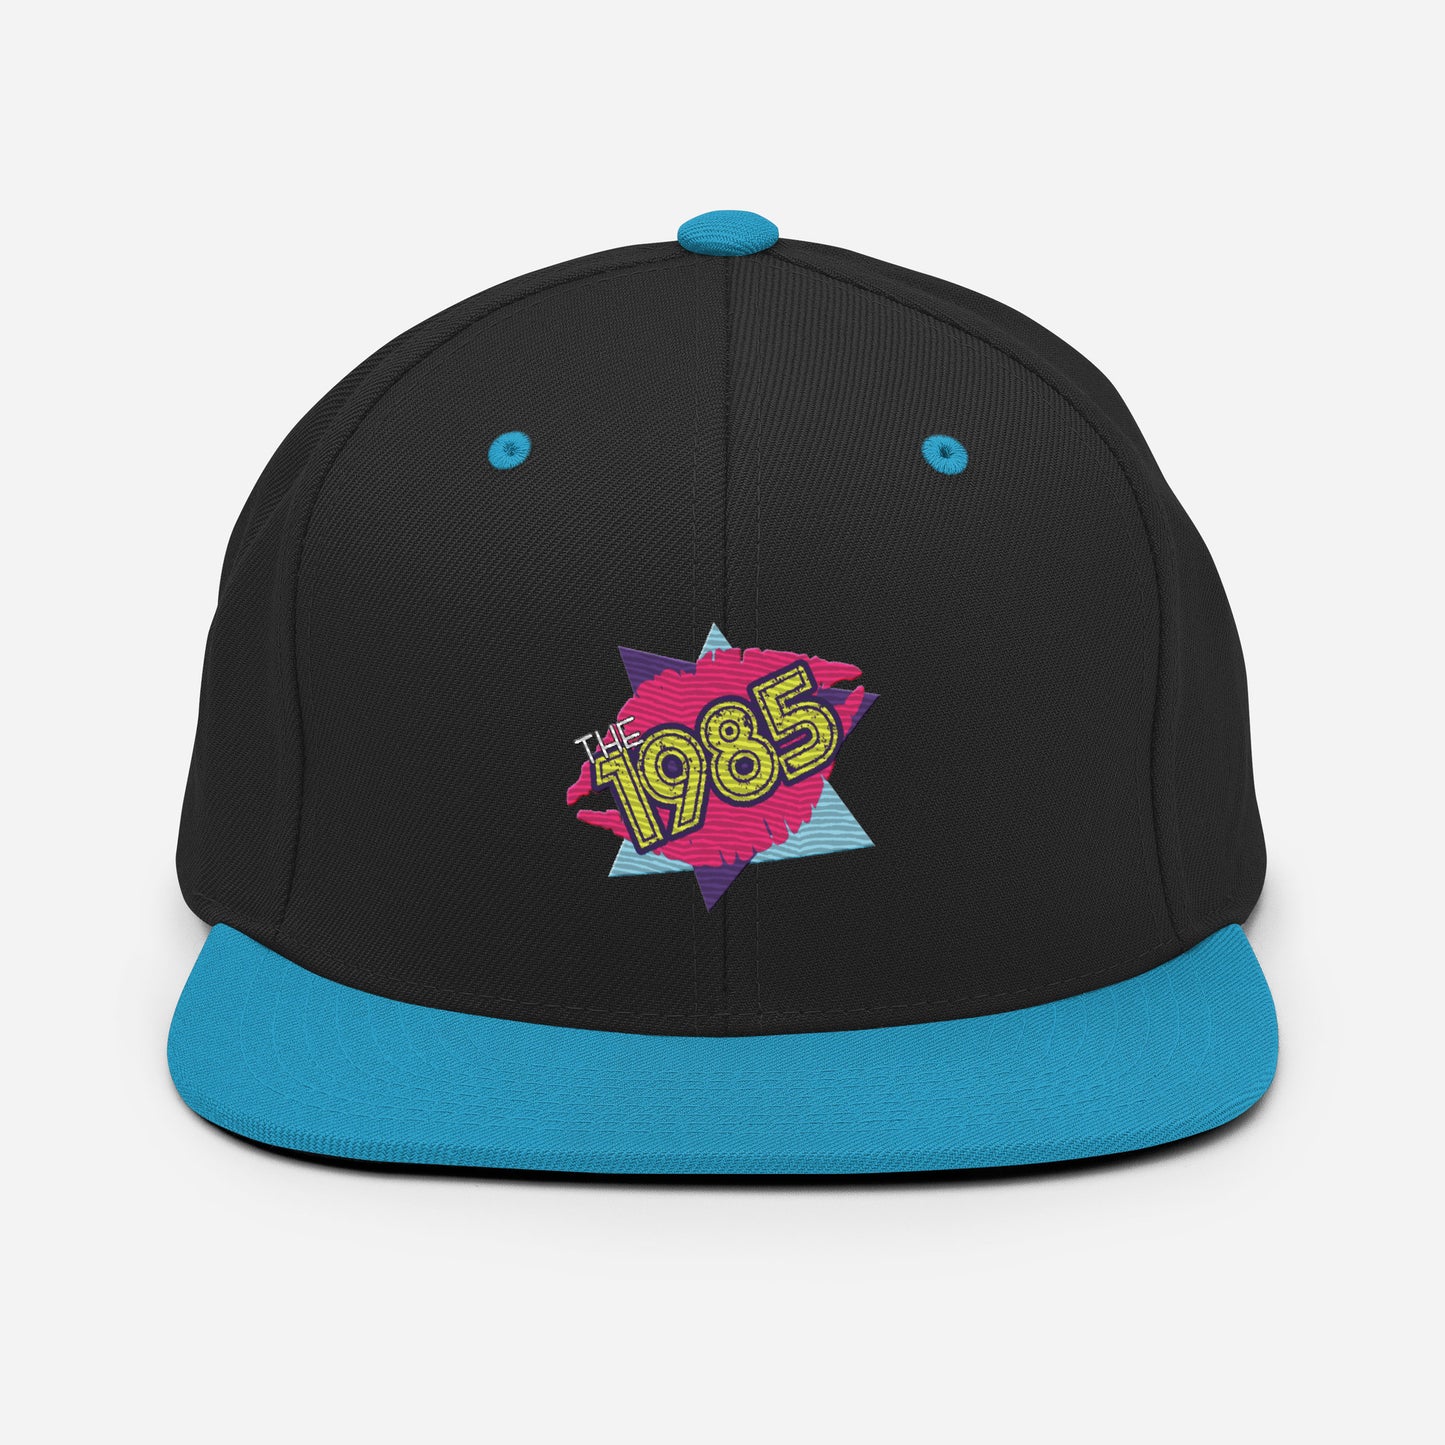 The 1985 Embroidered Logo Snapback Hat